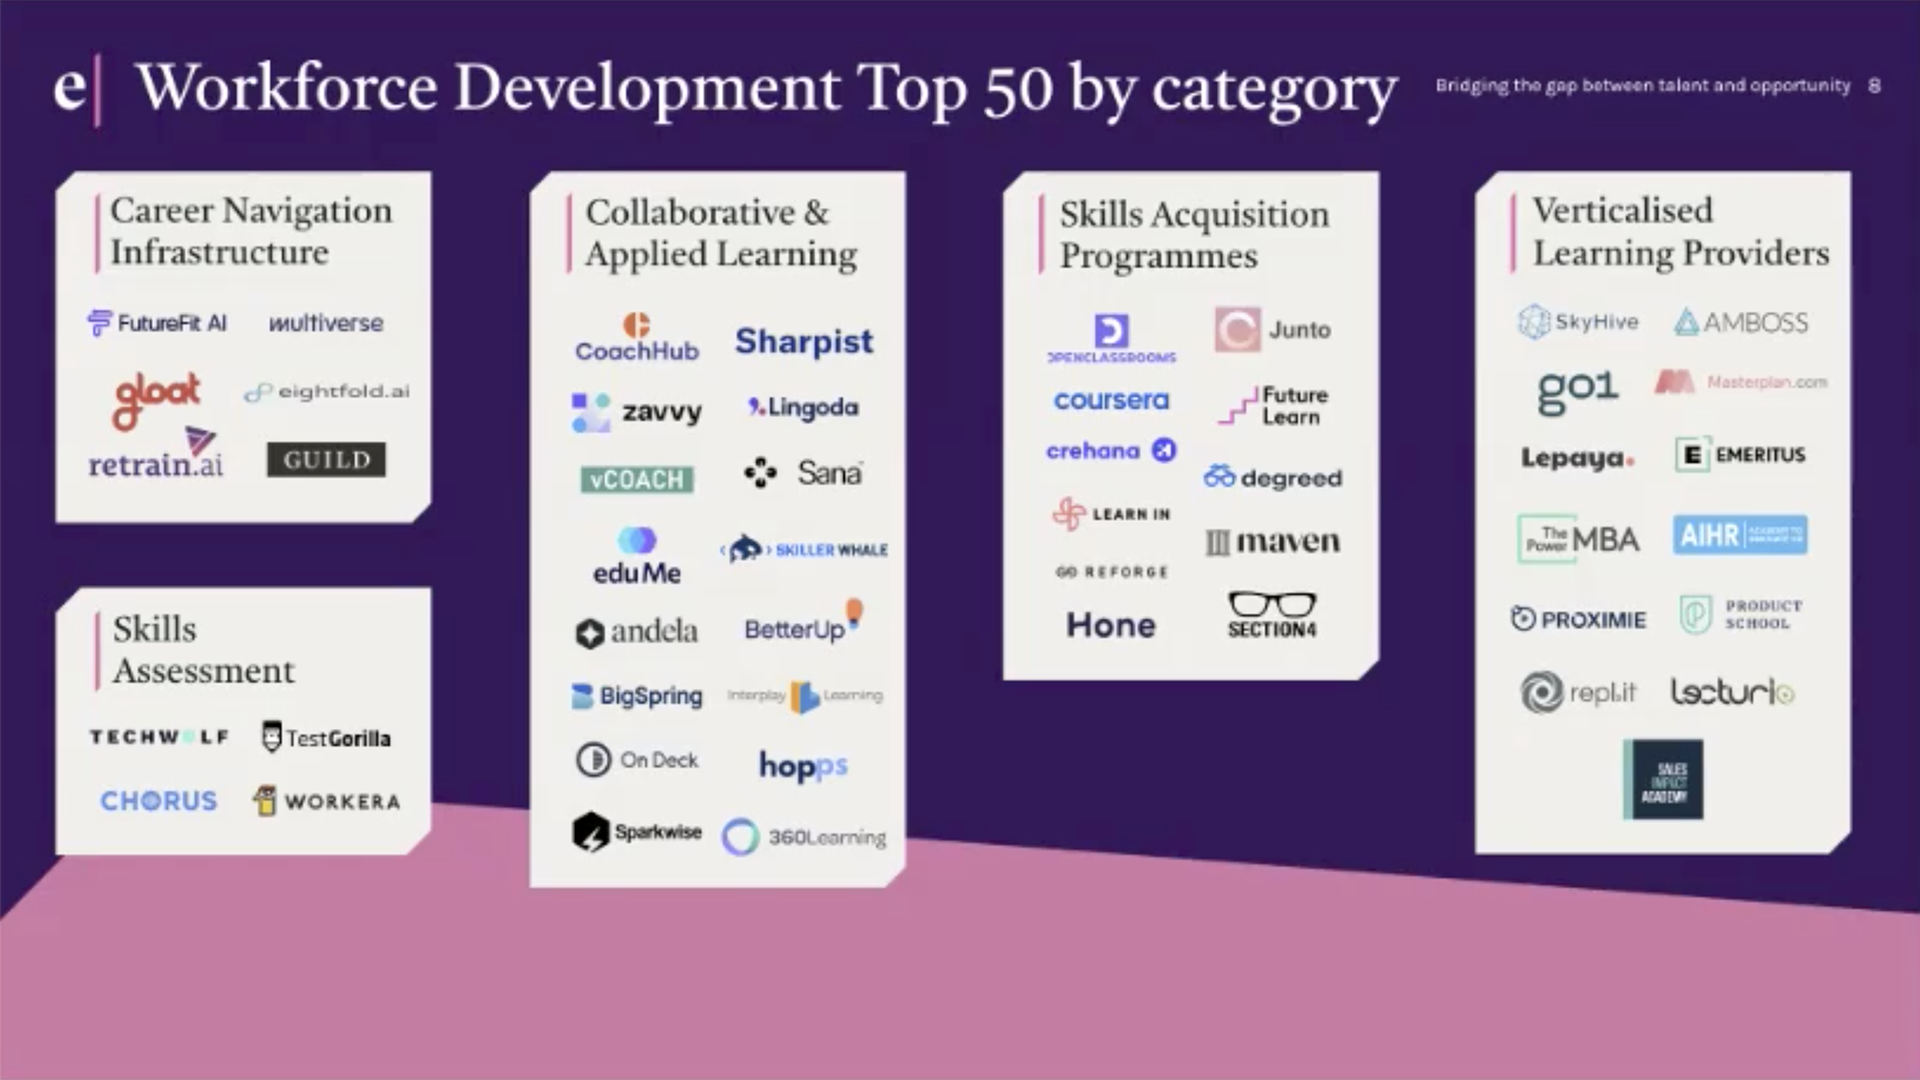 The Edtech Top 50 emerging companies for Workforce Development by category